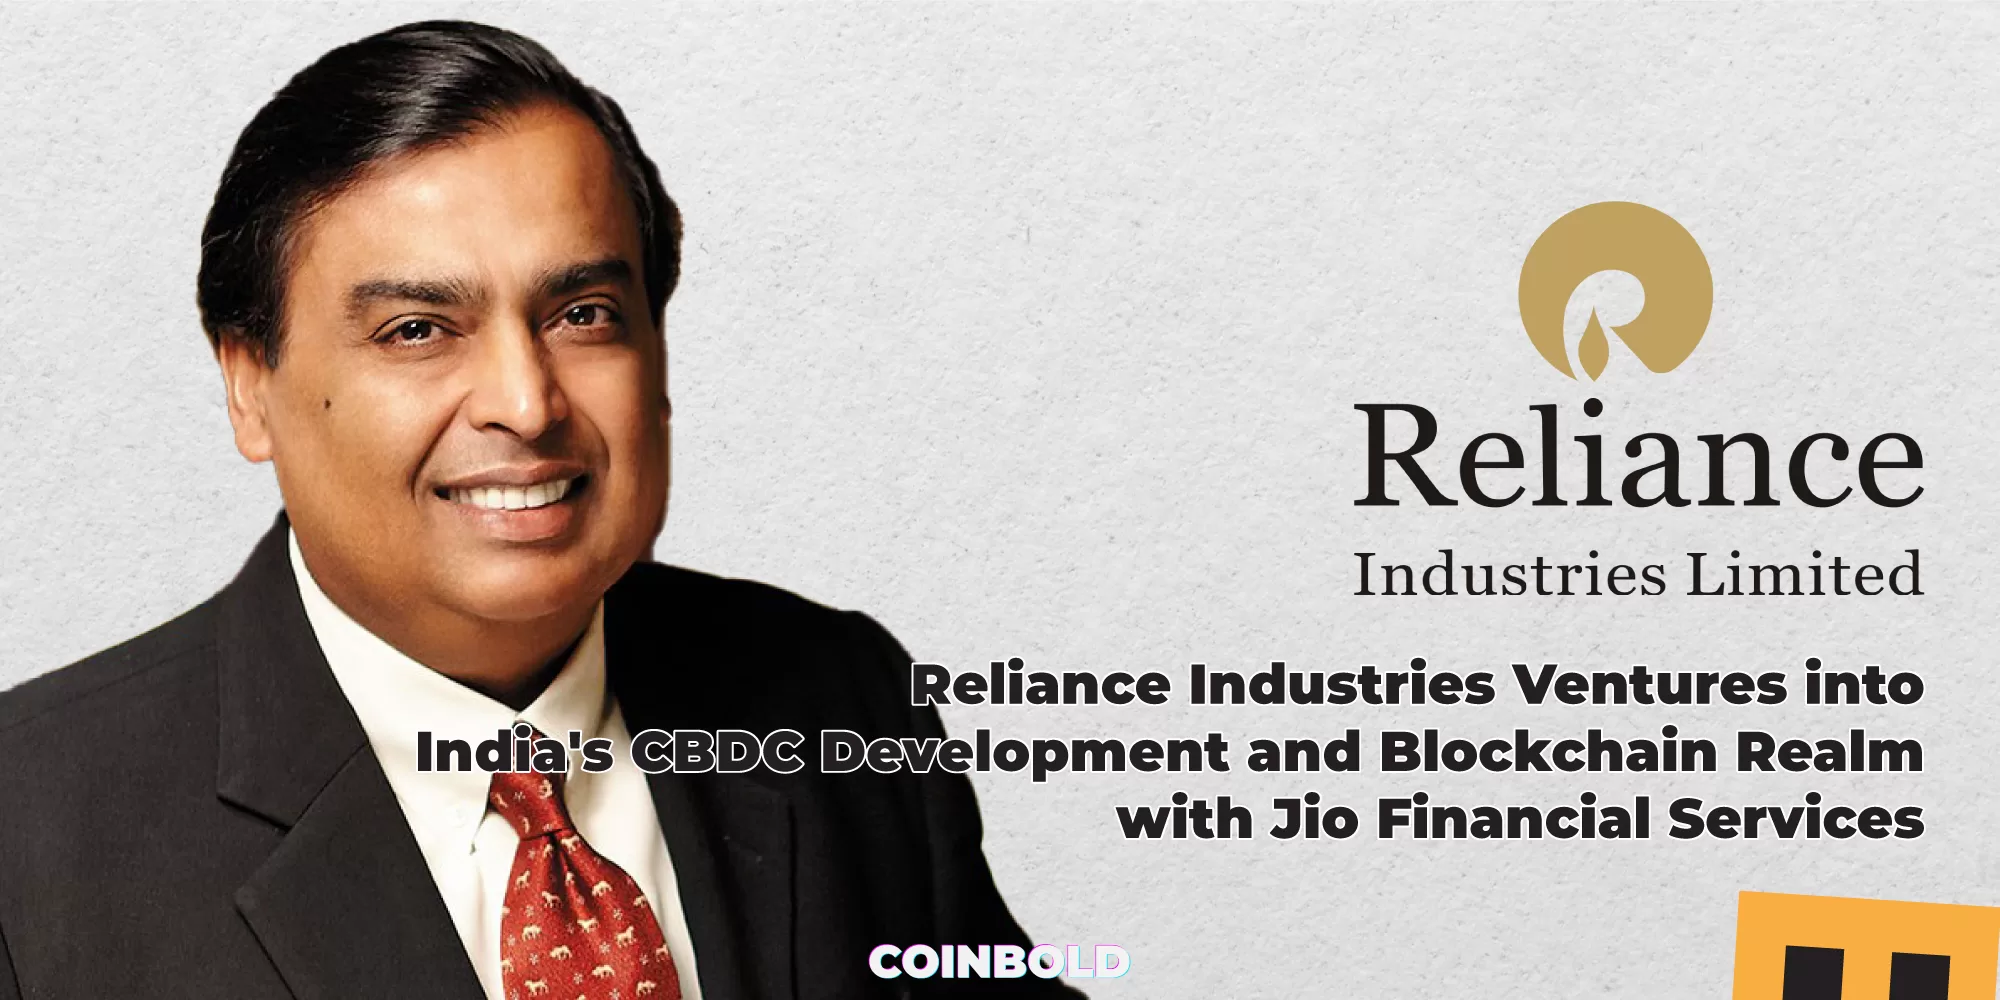 Reliance Industries Ventures into India's CBDC Development and Blockchain Realm with Jio Financial Services